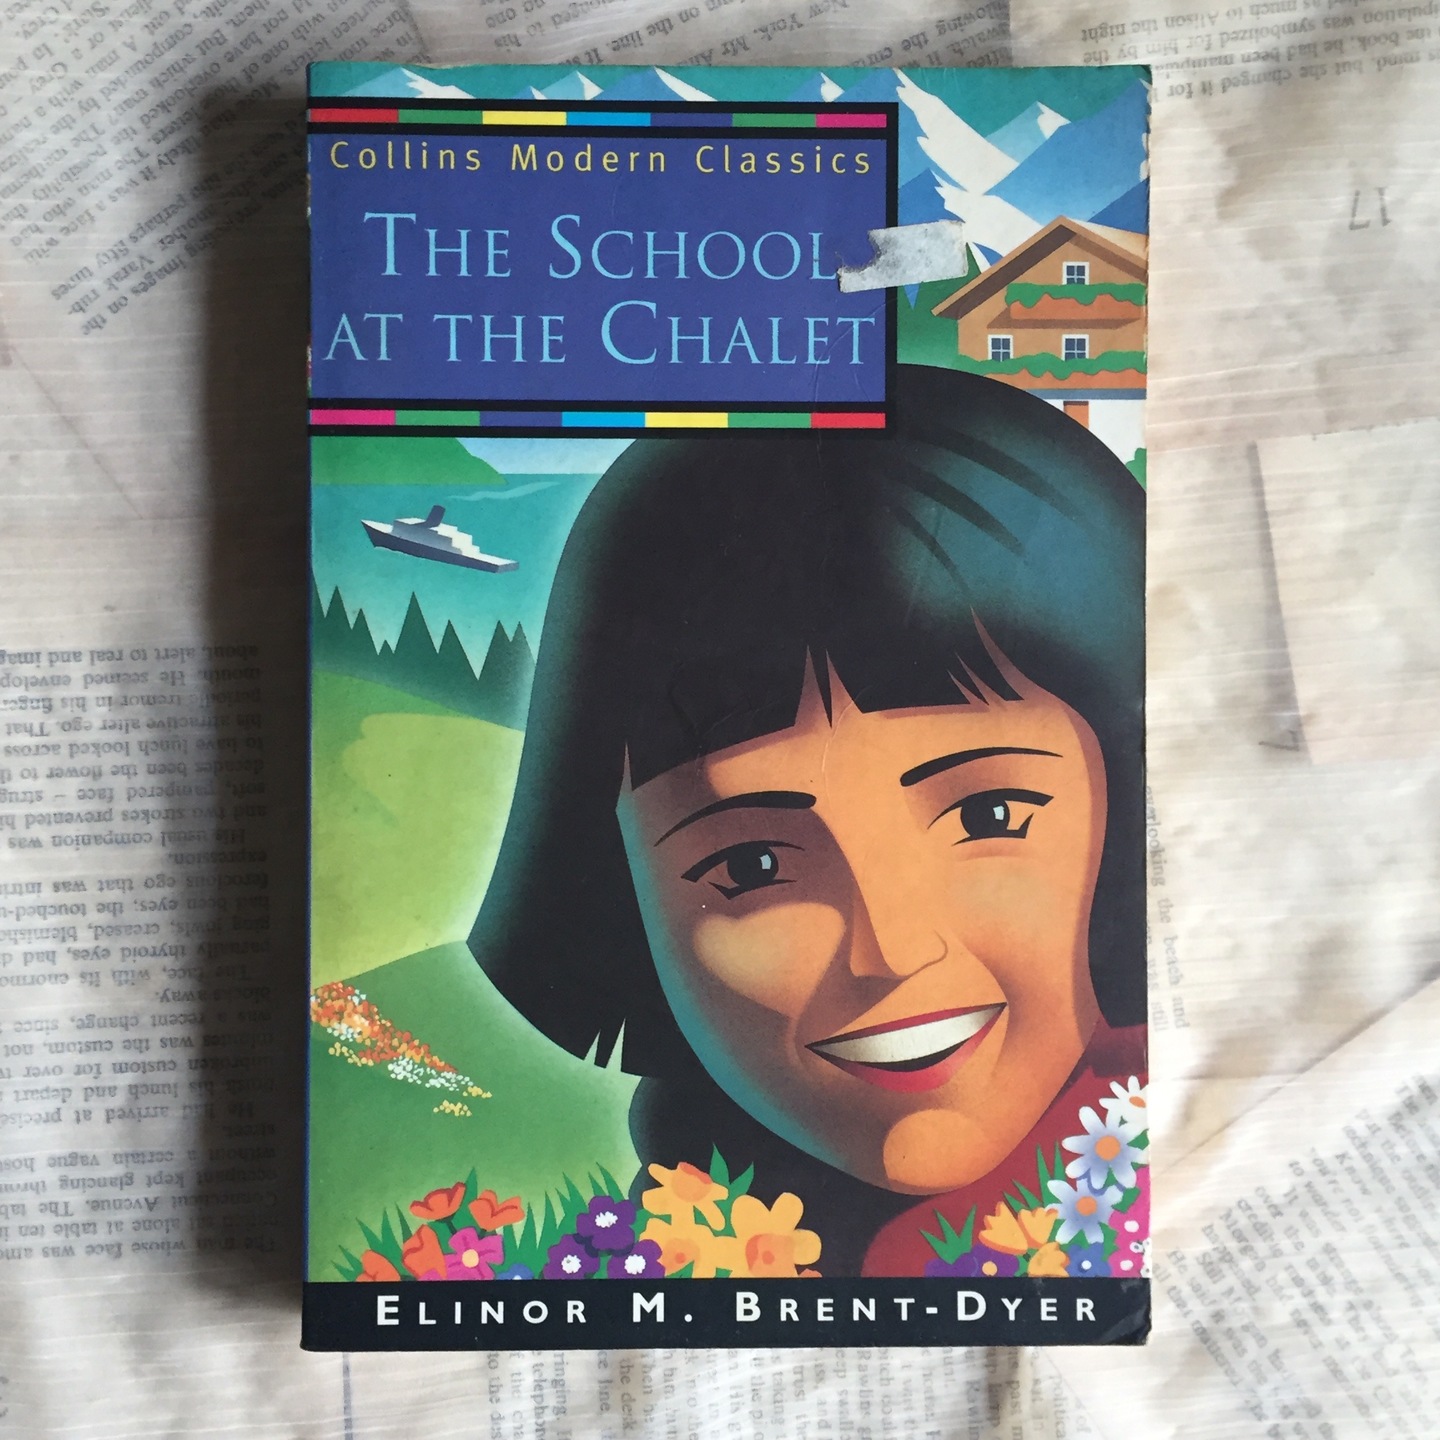 The School at the Chalet by Elinor M. Brent-Dyer [Paperback]